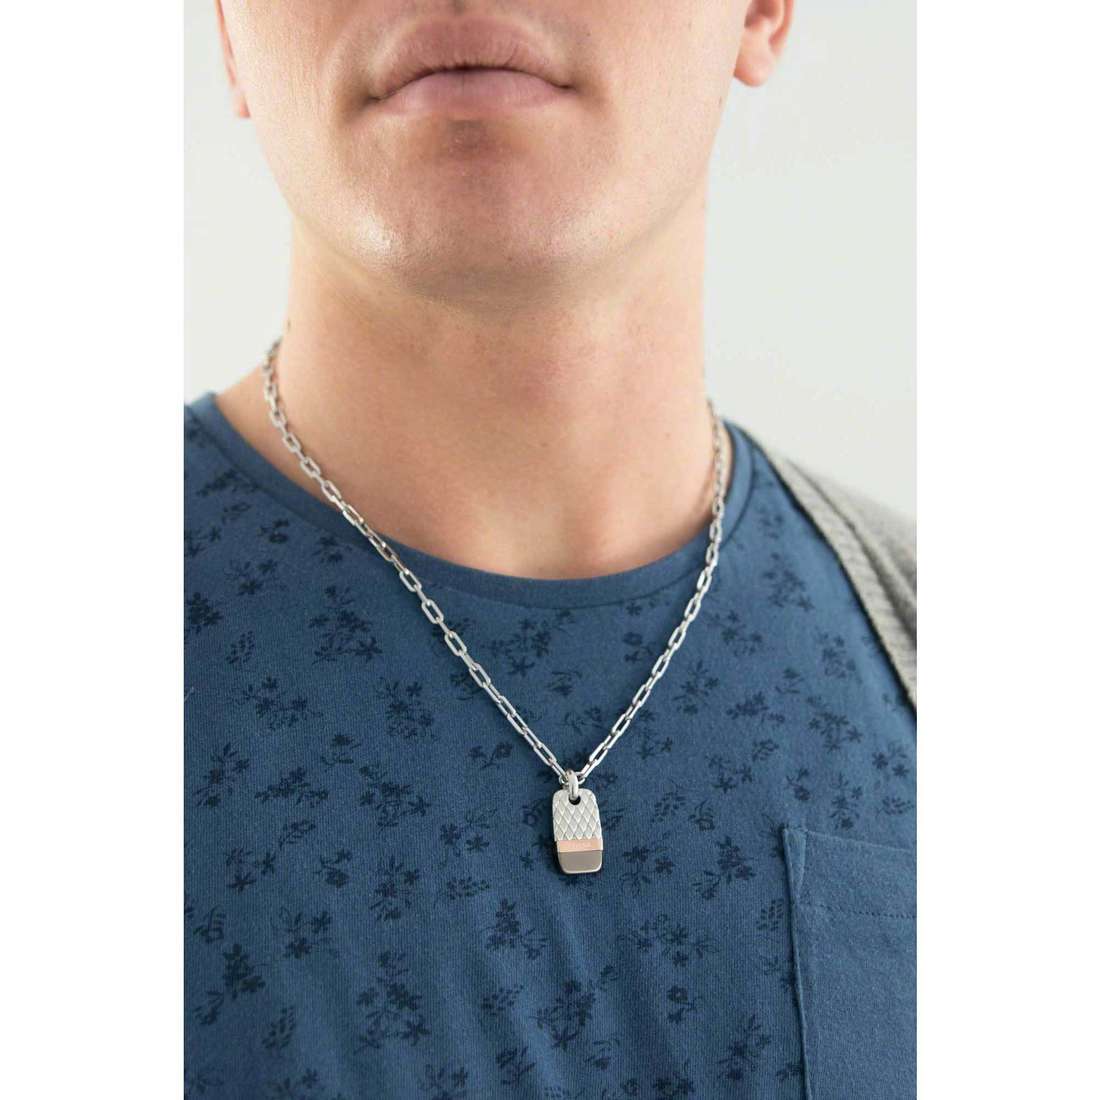 Fossil necklaces Holiday 15 man JF02084998 wearing